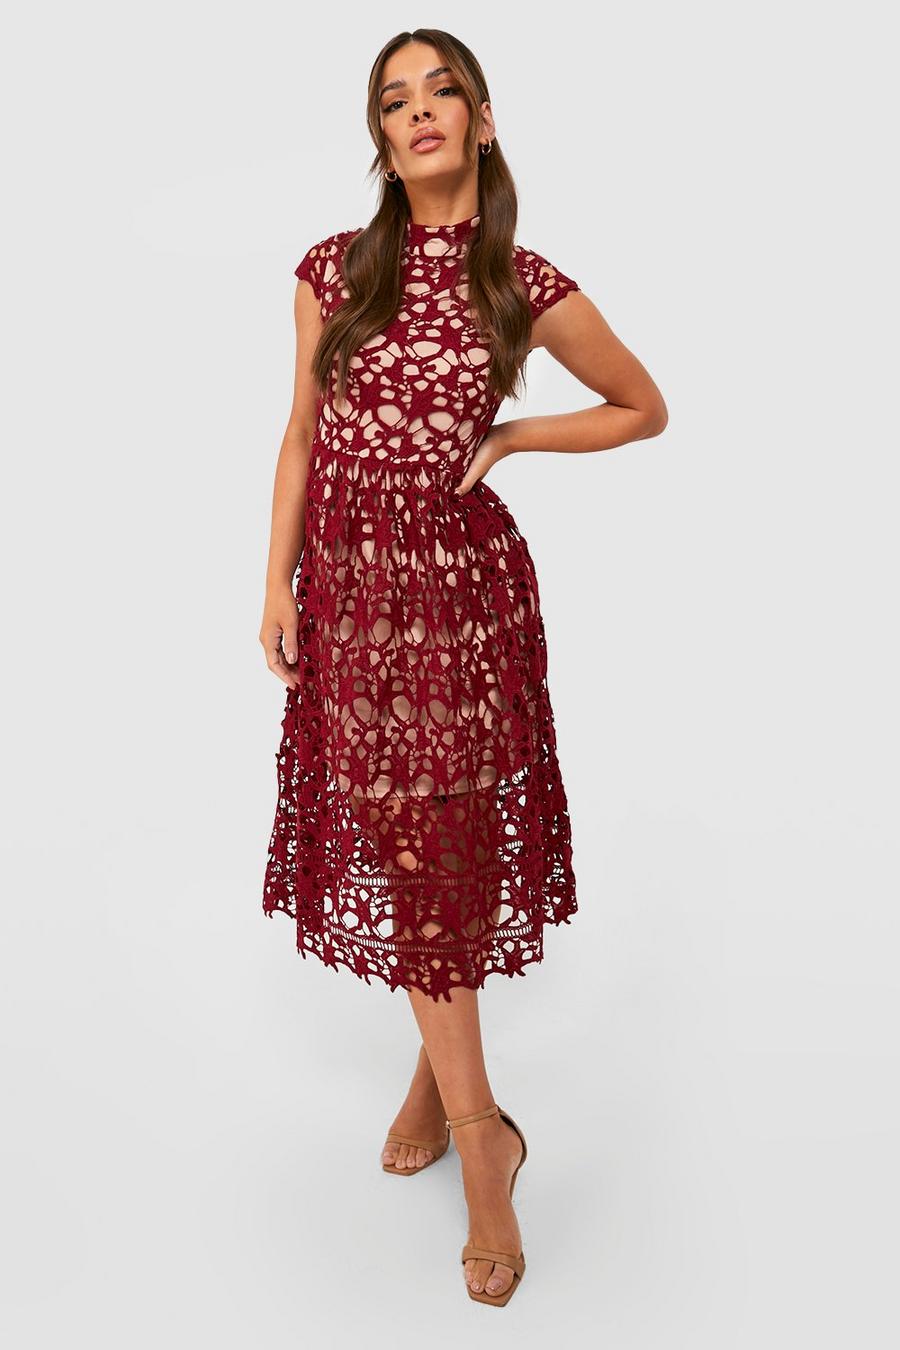 Berry red Boutique Lace Midi Skater Bridesmaid Dress